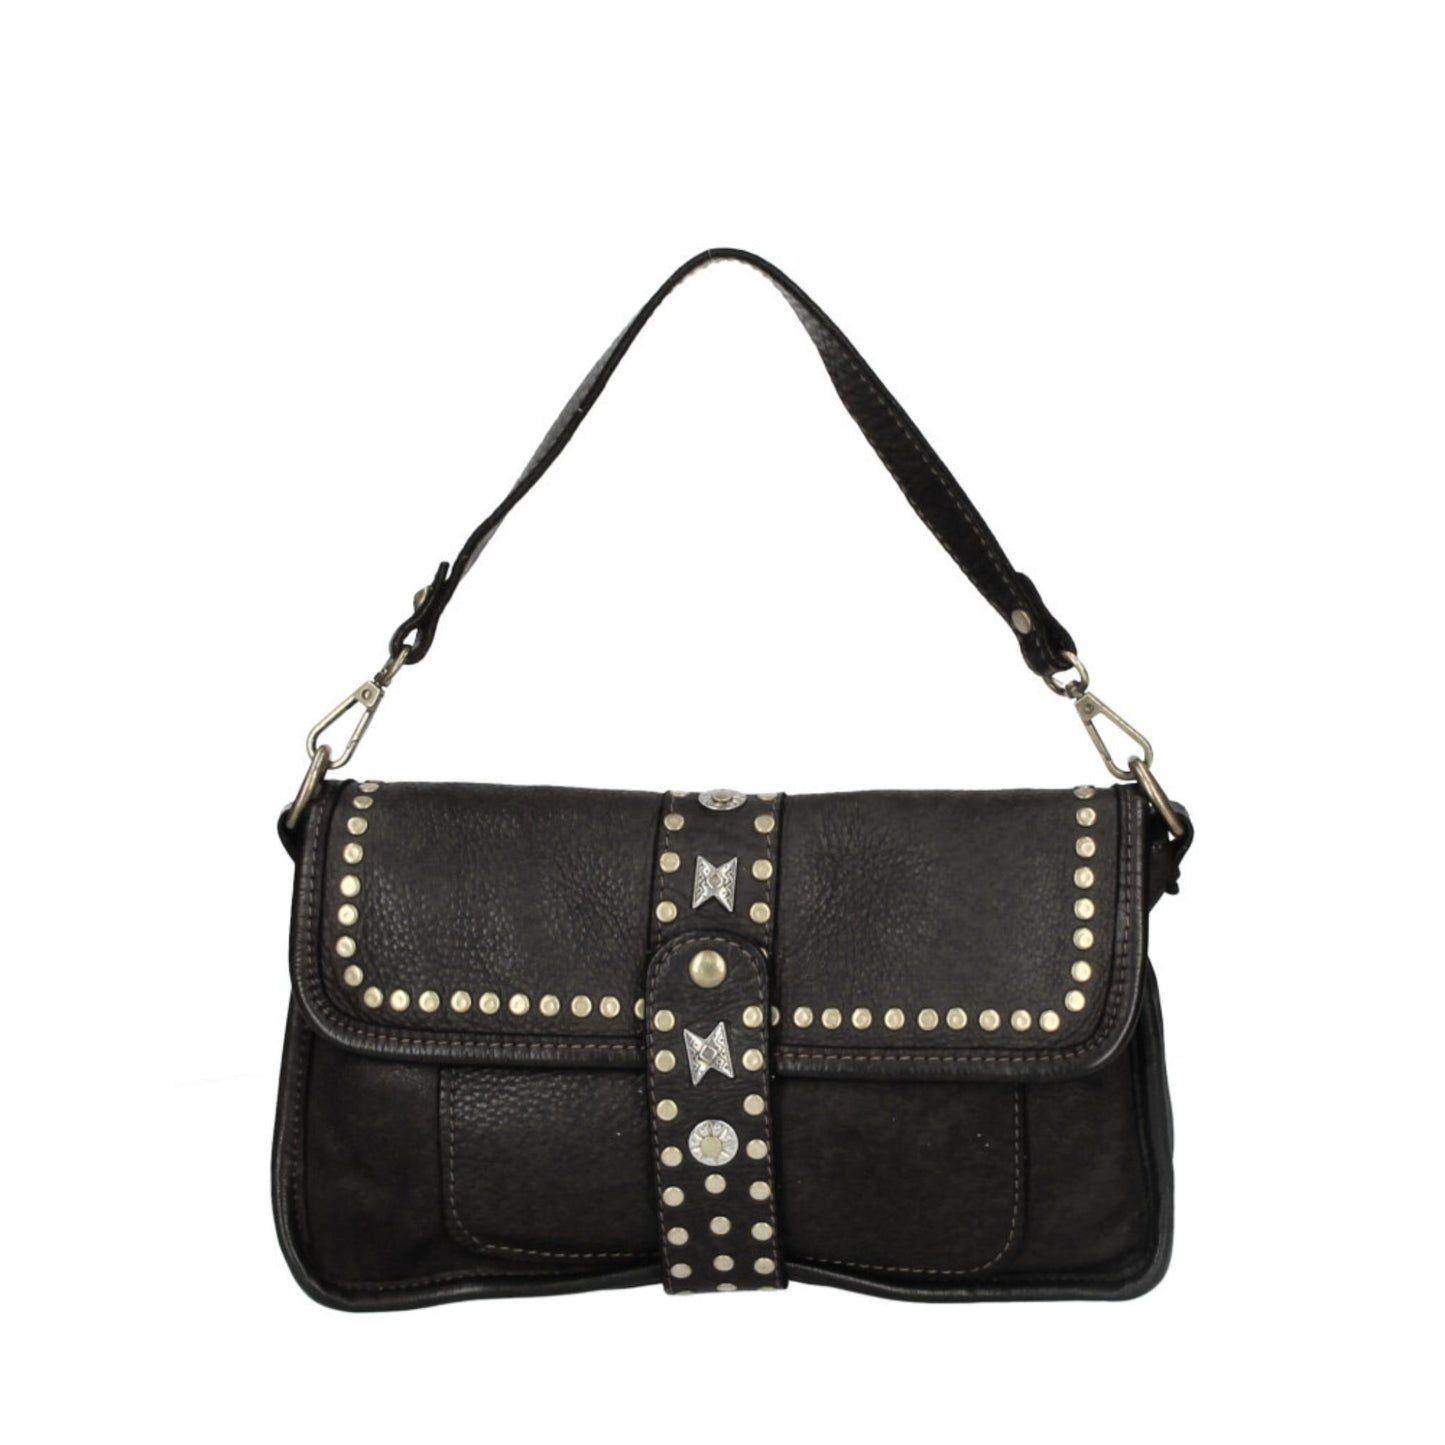 The Studded Leather Cross Body Bag SAMPLE